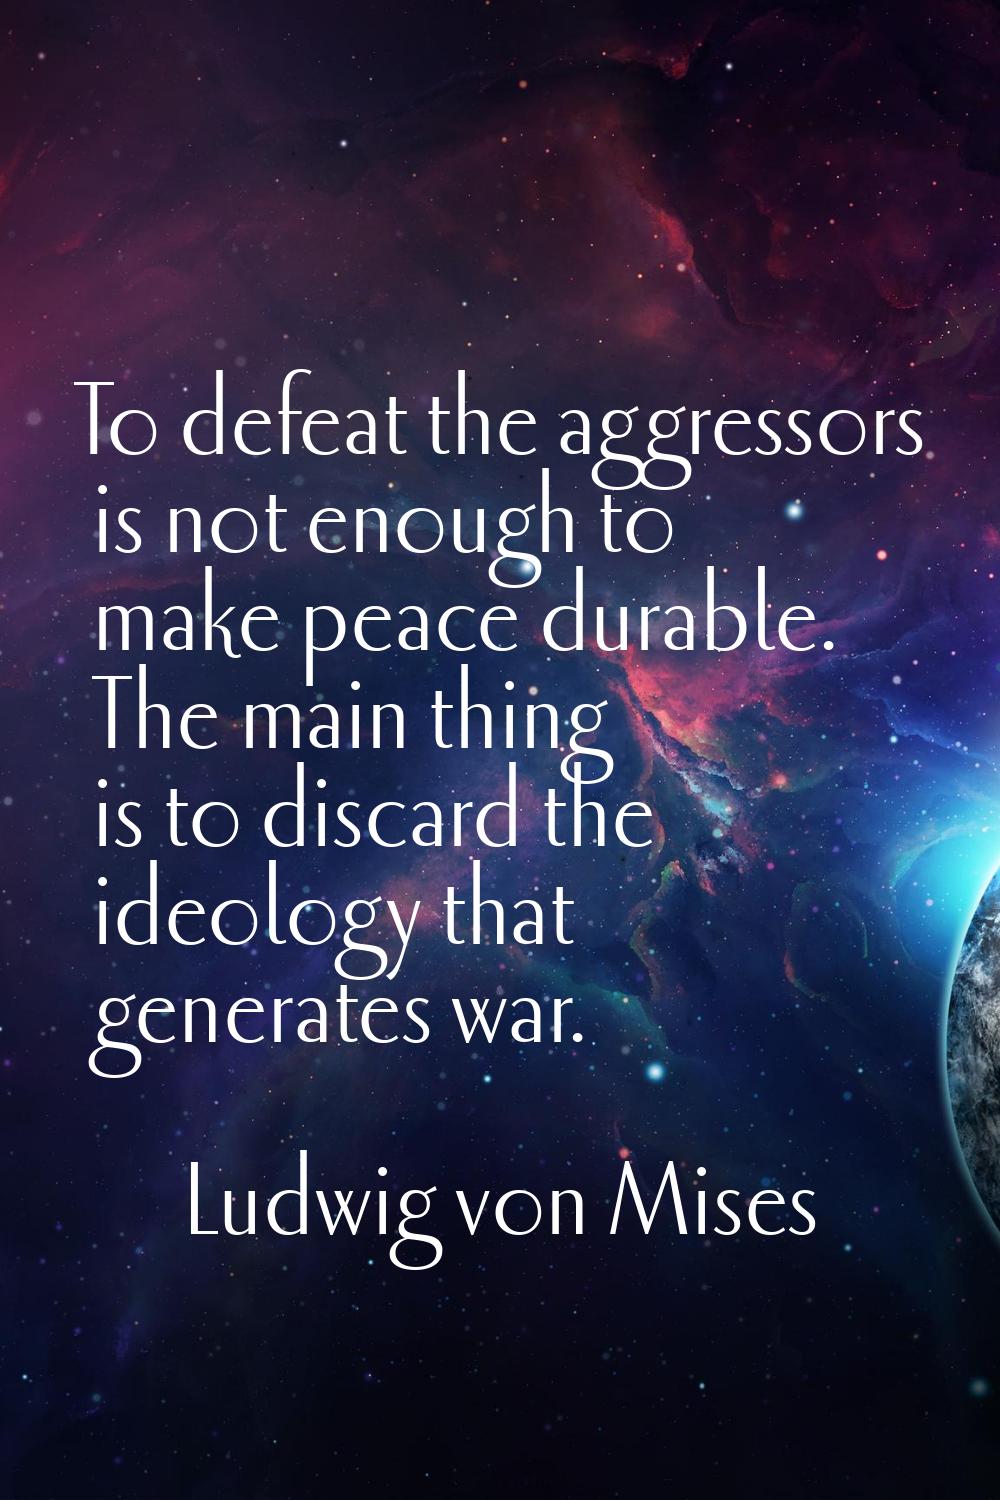 To defeat the aggressors is not enough to make peace durable. The main thing is to discard the ideo